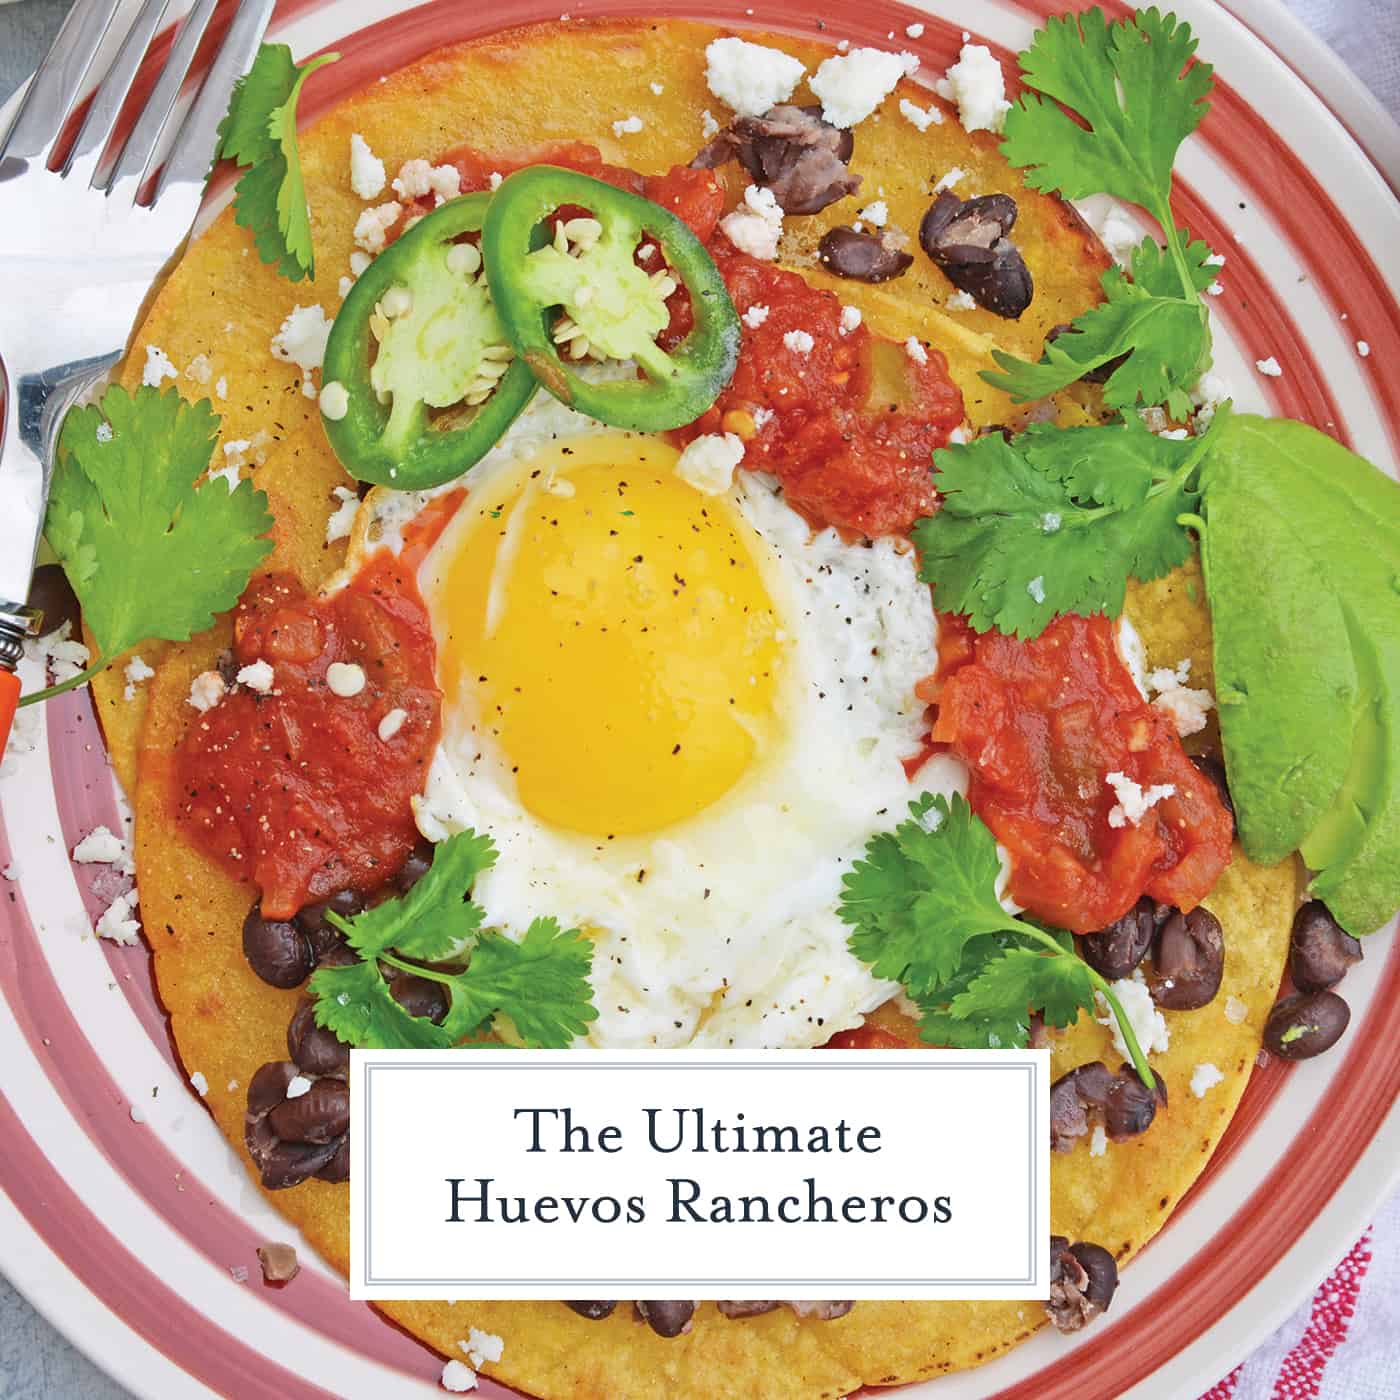 Huevos Rancheros are a great way to spice up your breakfast. Lacey eggs with a runny yolk over warm corn tortillas, chunky salsa, black beans, cilantro and queso fresco. #huevosrancheros www.savoryexperiments.com 